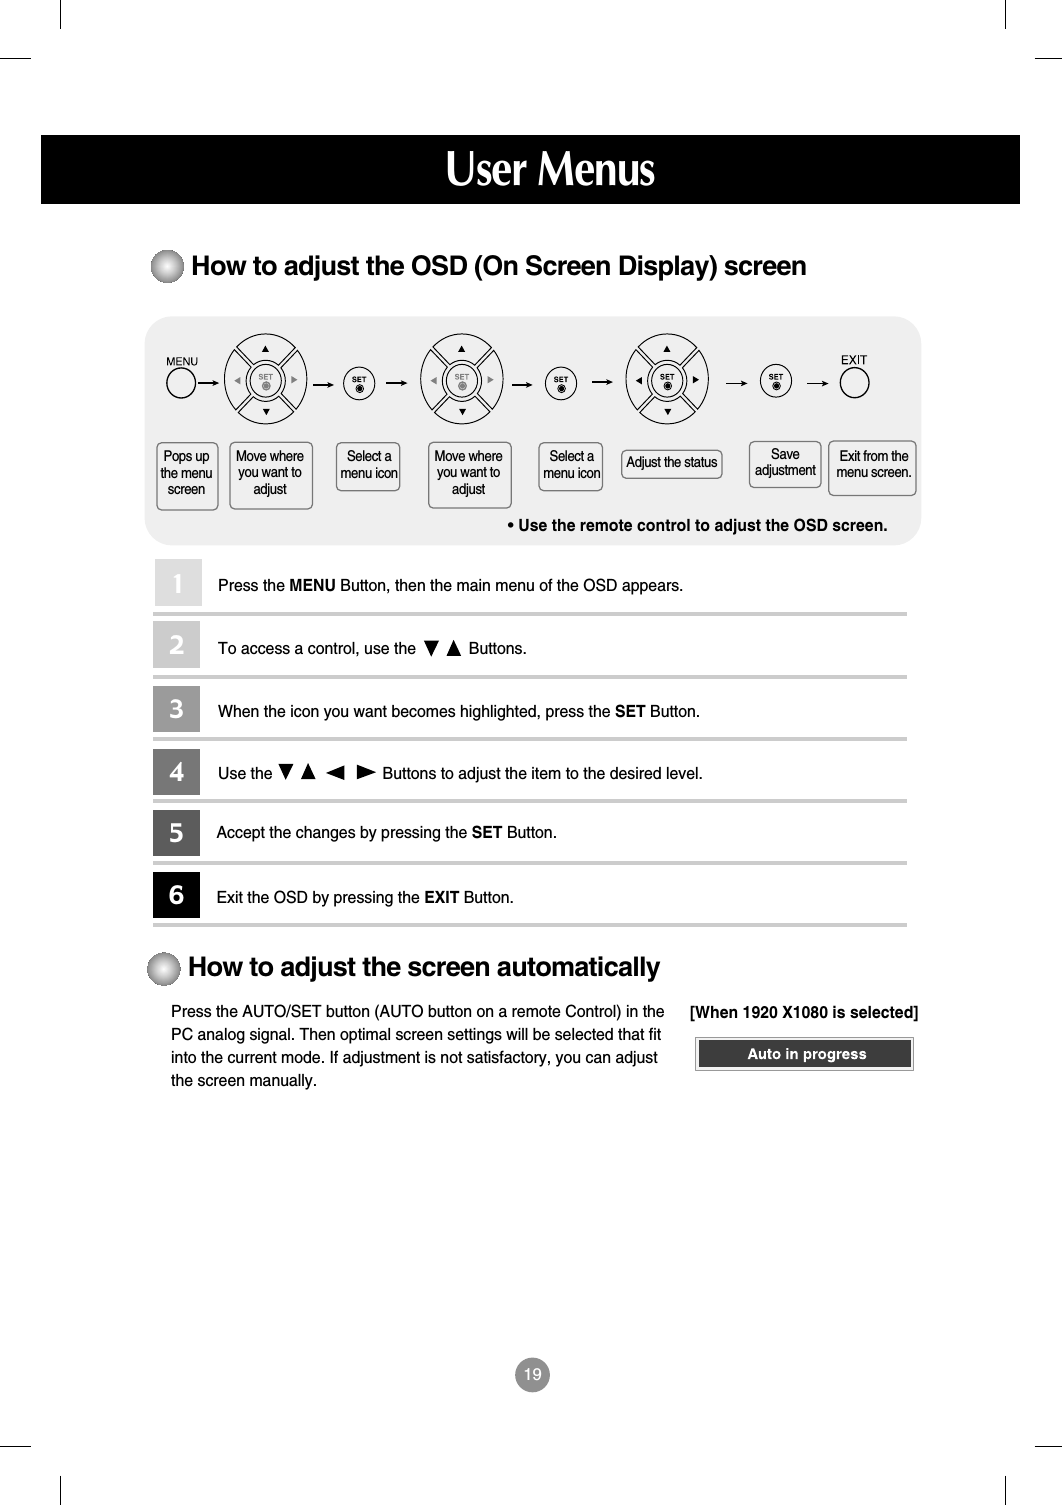 19How to adjust the OSD (On Screen Display) screen•Use the remote control to adjust the OSD screen.How to adjust the screen automaticallyPress the AUTO/SET button (AUTO button on a remote Control) in thePC analog signal. Then optimal screen settings will be selected that fitinto the current mode. If adjustment is not satisfactory, you can adjustthe screen manually.Press the MENU Button, then the main menu of the OSD appears.To access a control, use the            Buttons. When the icon you want becomes highlighted, press the SET Button.Use the                         Buttons to adjust the item to the desired level.Accept the changes by pressing the SET Button.Exit the OSD by pressing the EXIT Button.123456Pops upthe menuscreenMove whereyou want toadjustMove whereyou want toadjustSelect amenu iconSelect amenu icon Adjust the status Saveadjustment Exit from themenu screen.User Menus[When 1920 X1080 is selected]